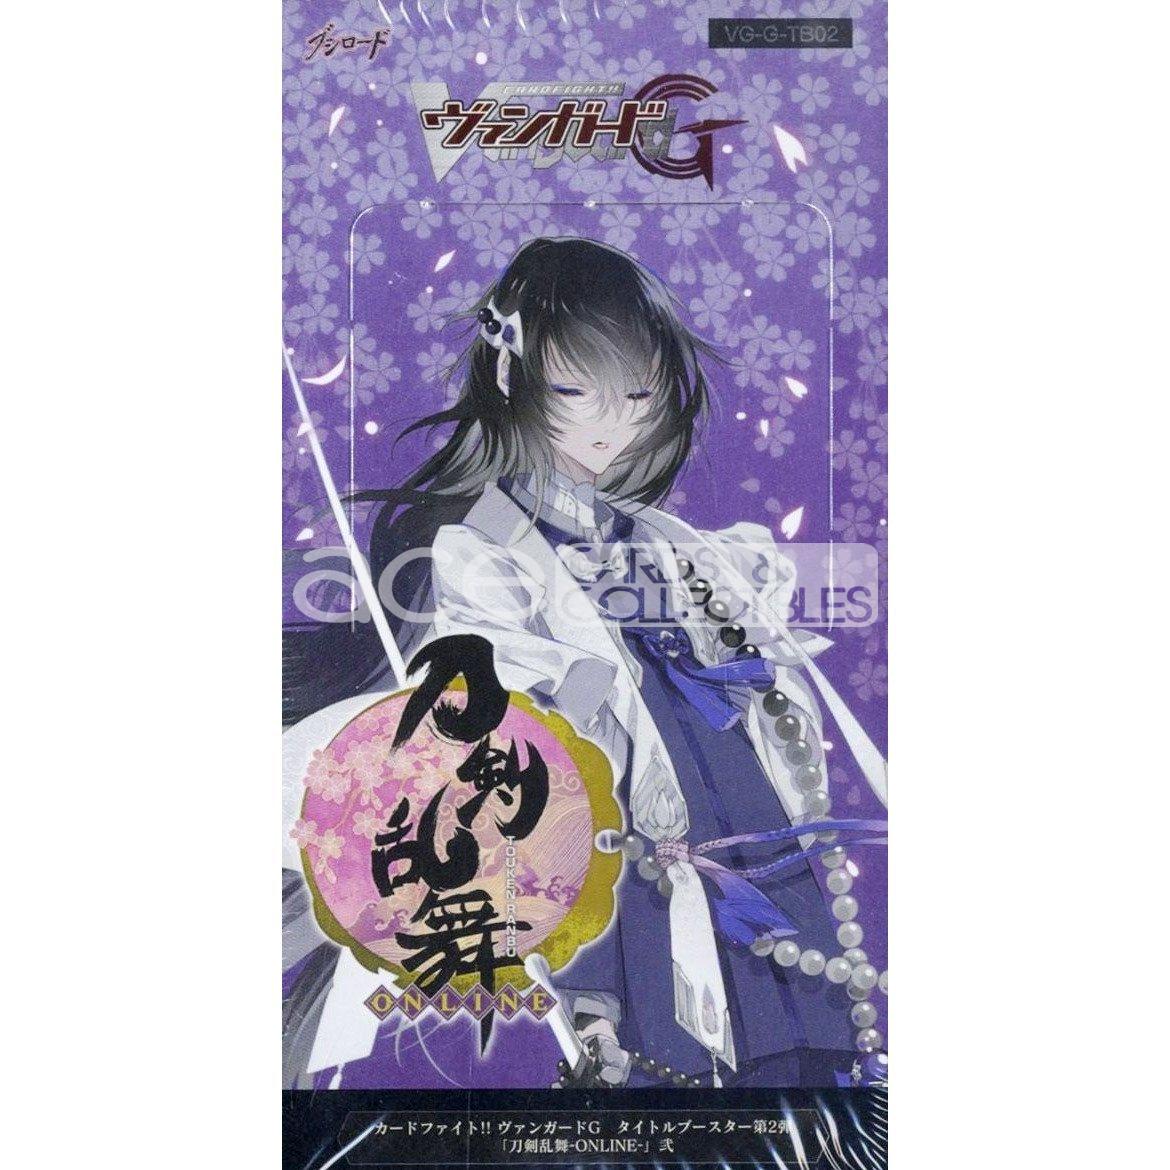 Cardfight Vanguard G Touken Ranbu -ONLINE- [VG-G-TB02] (Japanese)-Booster Box (12packs)-Bushiroad-Ace Cards &amp; Collectibles